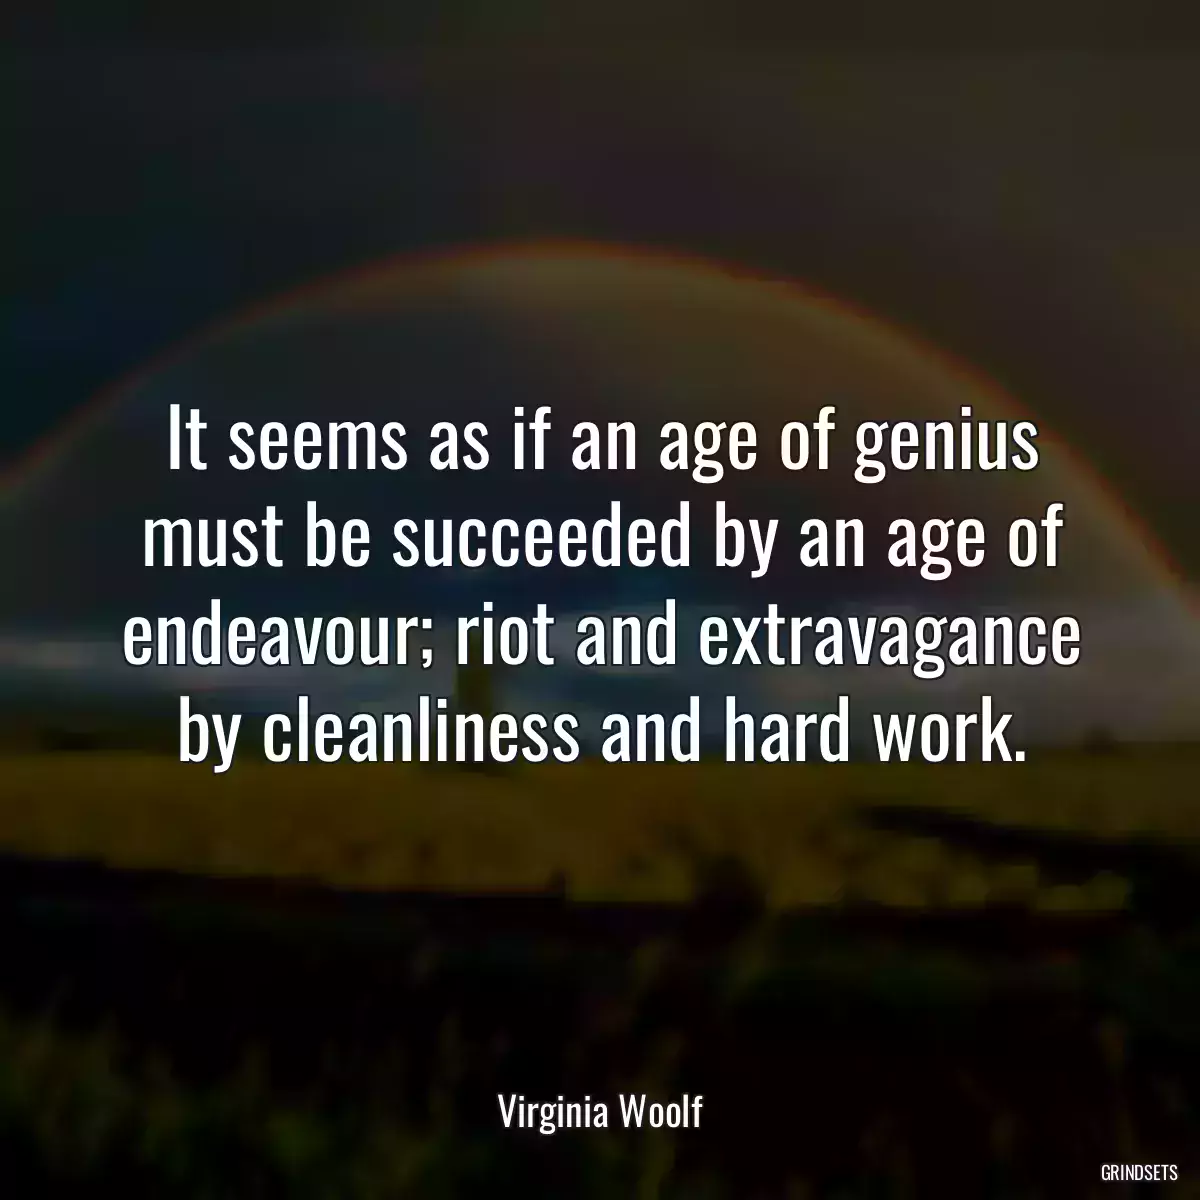 It seems as if an age of genius must be succeeded by an age of endeavour; riot and extravagance by cleanliness and hard work.